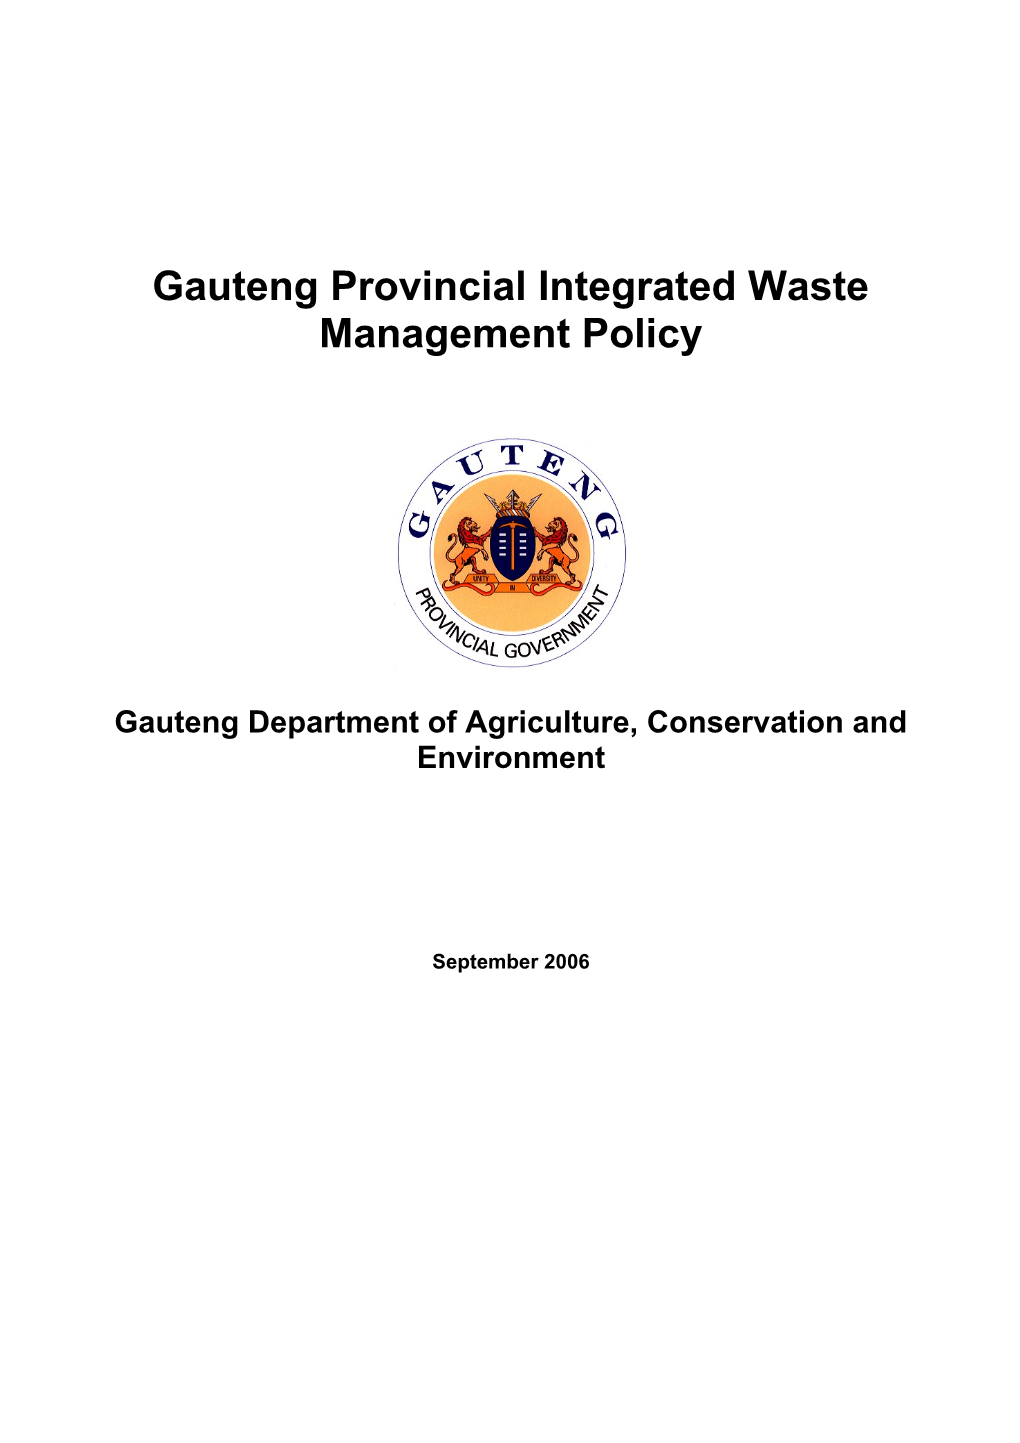 Gauteng Provincial Integrated Waste Management Policy